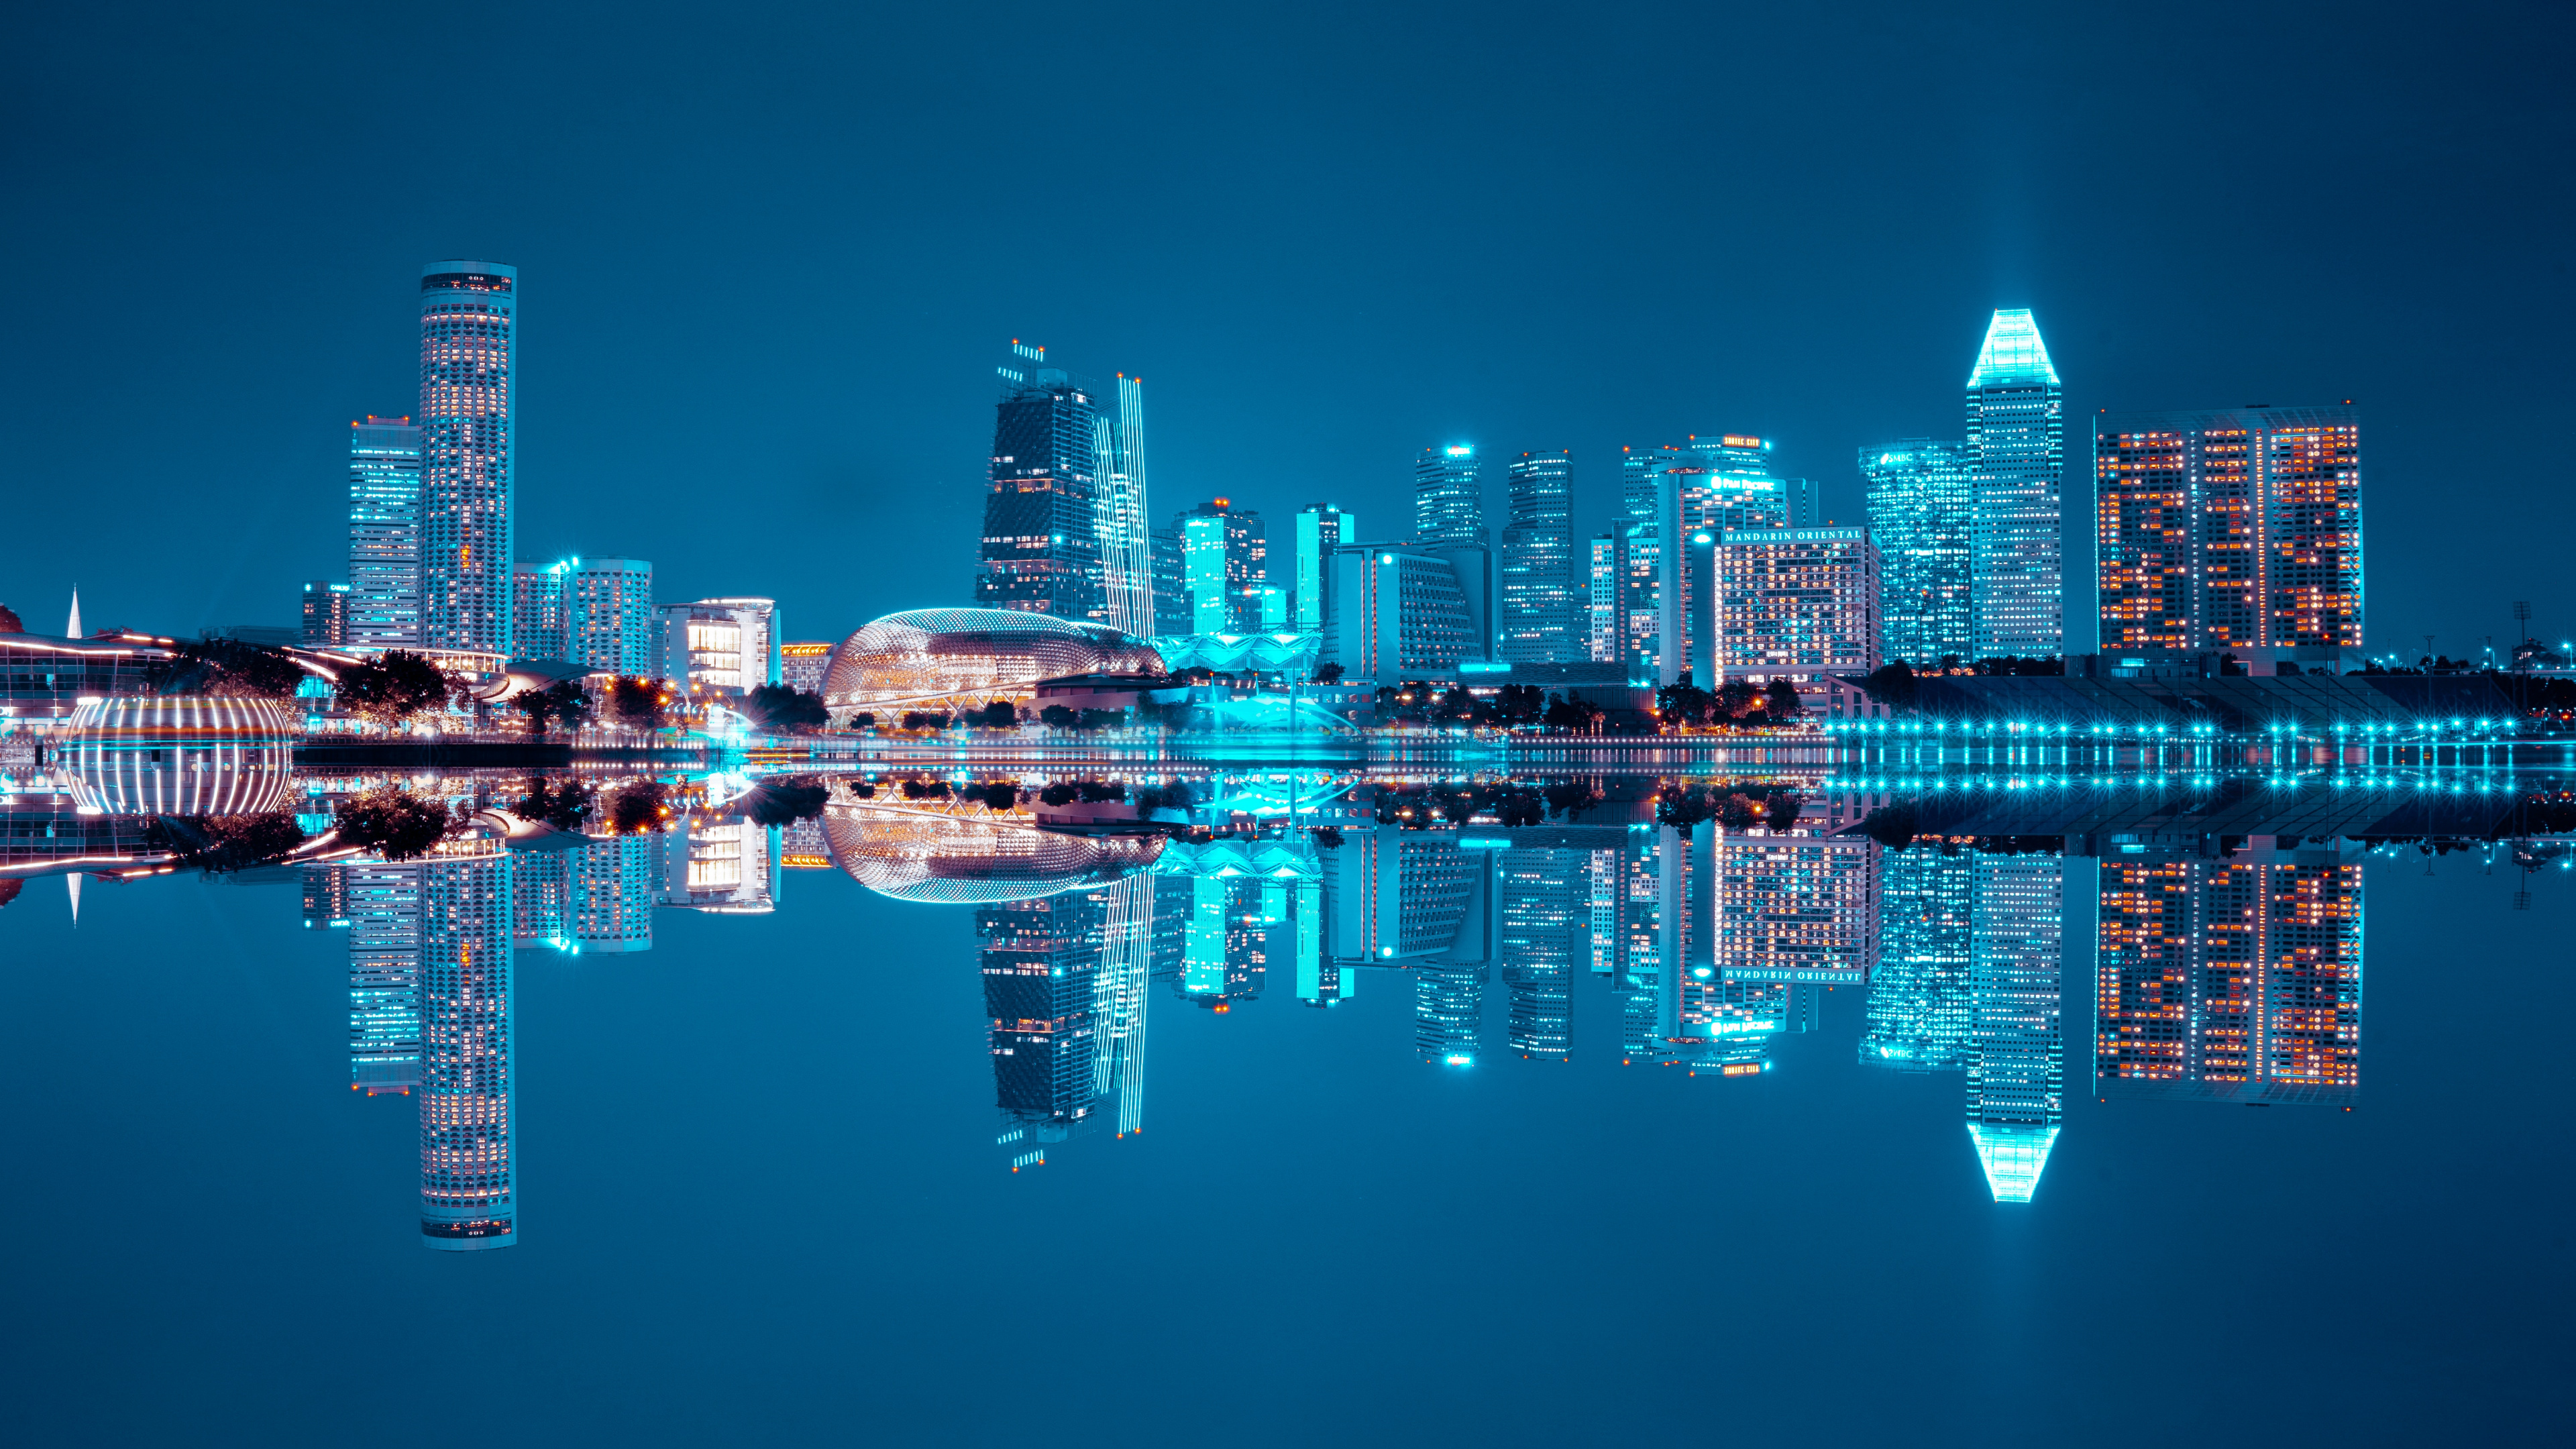 City Skyline Across Body of Water During Night Time. Wallpaper in 3840x2160 Resolution